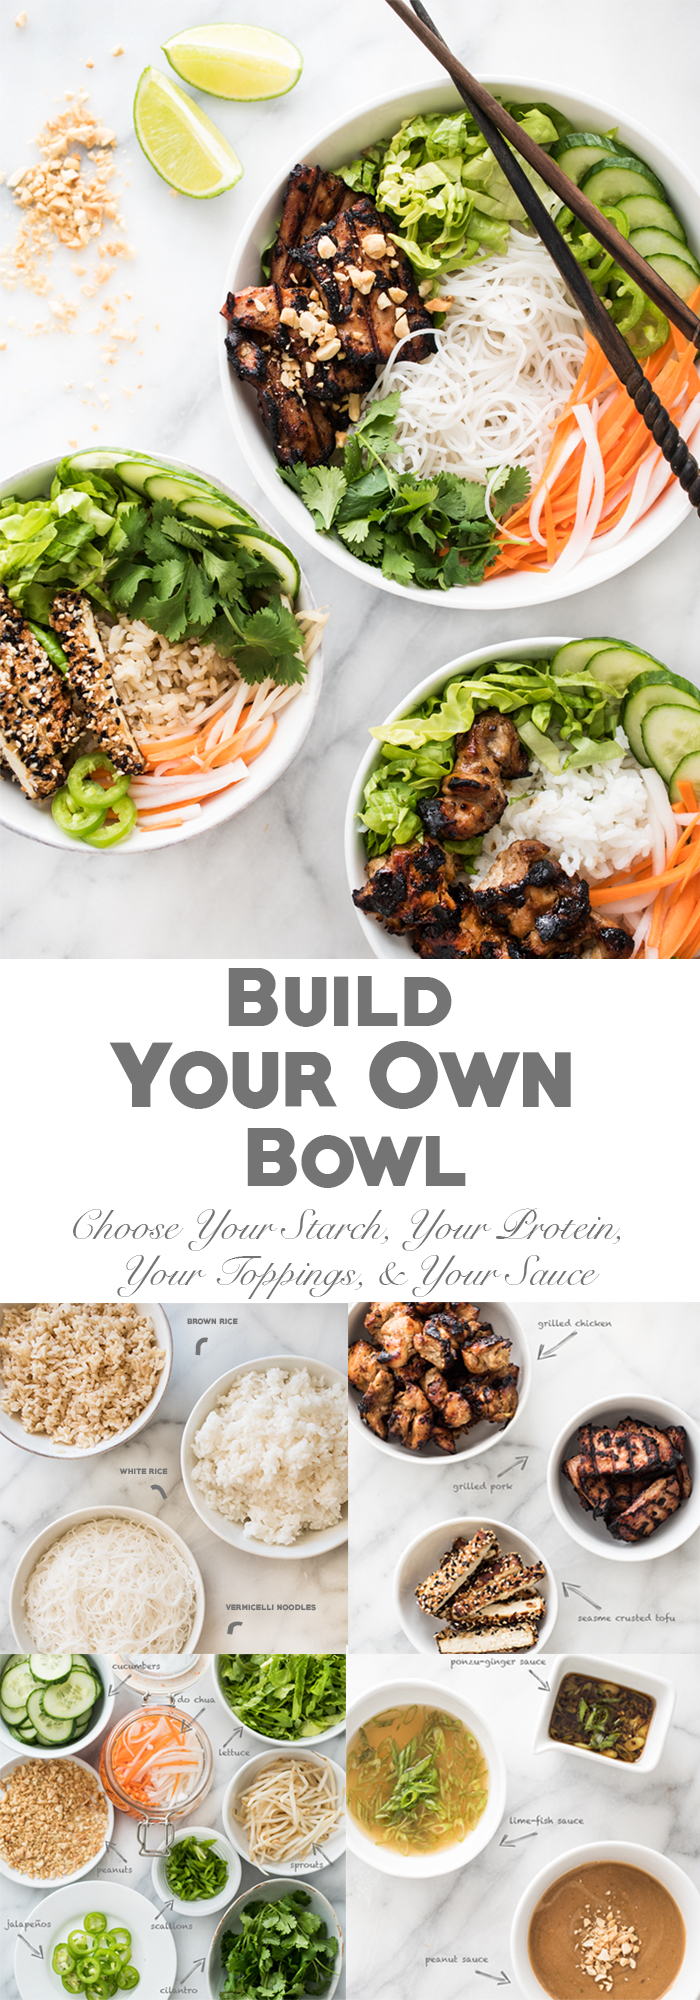 Entertaining? Let your guests build their own bowl!